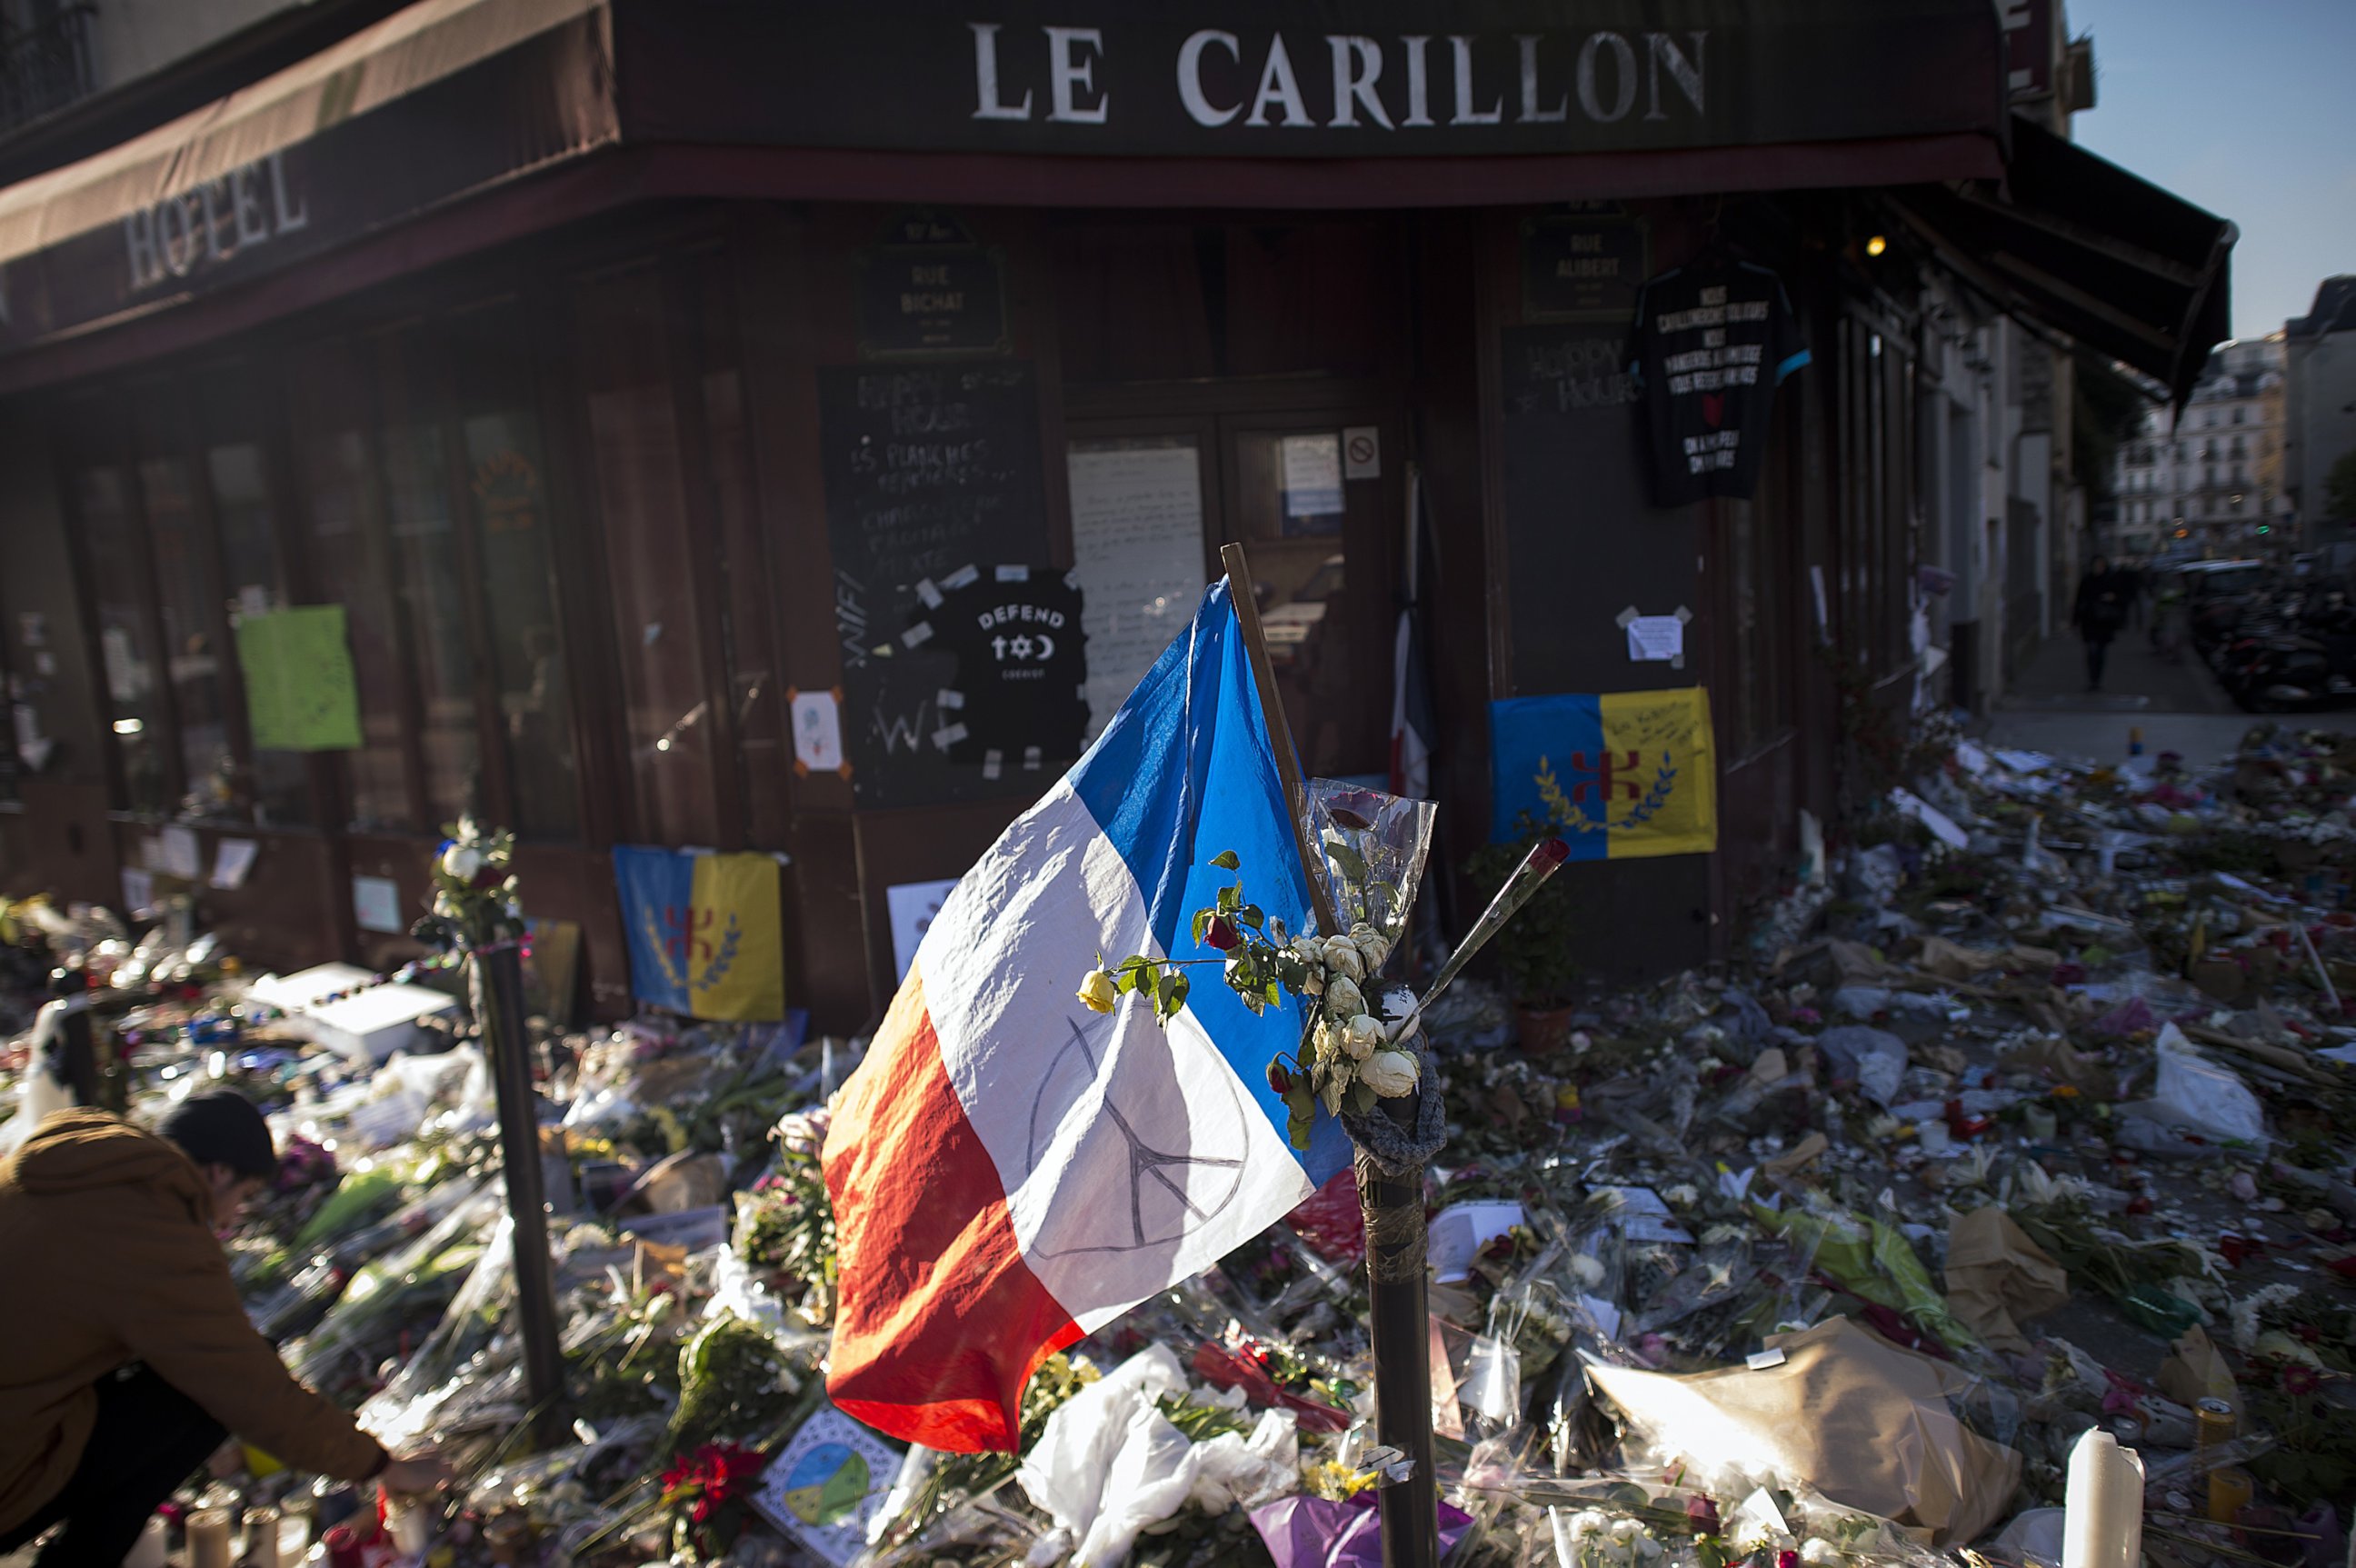 PHOTO:A photo shows a makeshift memorial for a tribute to the victims of a series of deadly attacks in Paris, in front of the Carillon cafe in Paris, Nov. 23, 2015.  